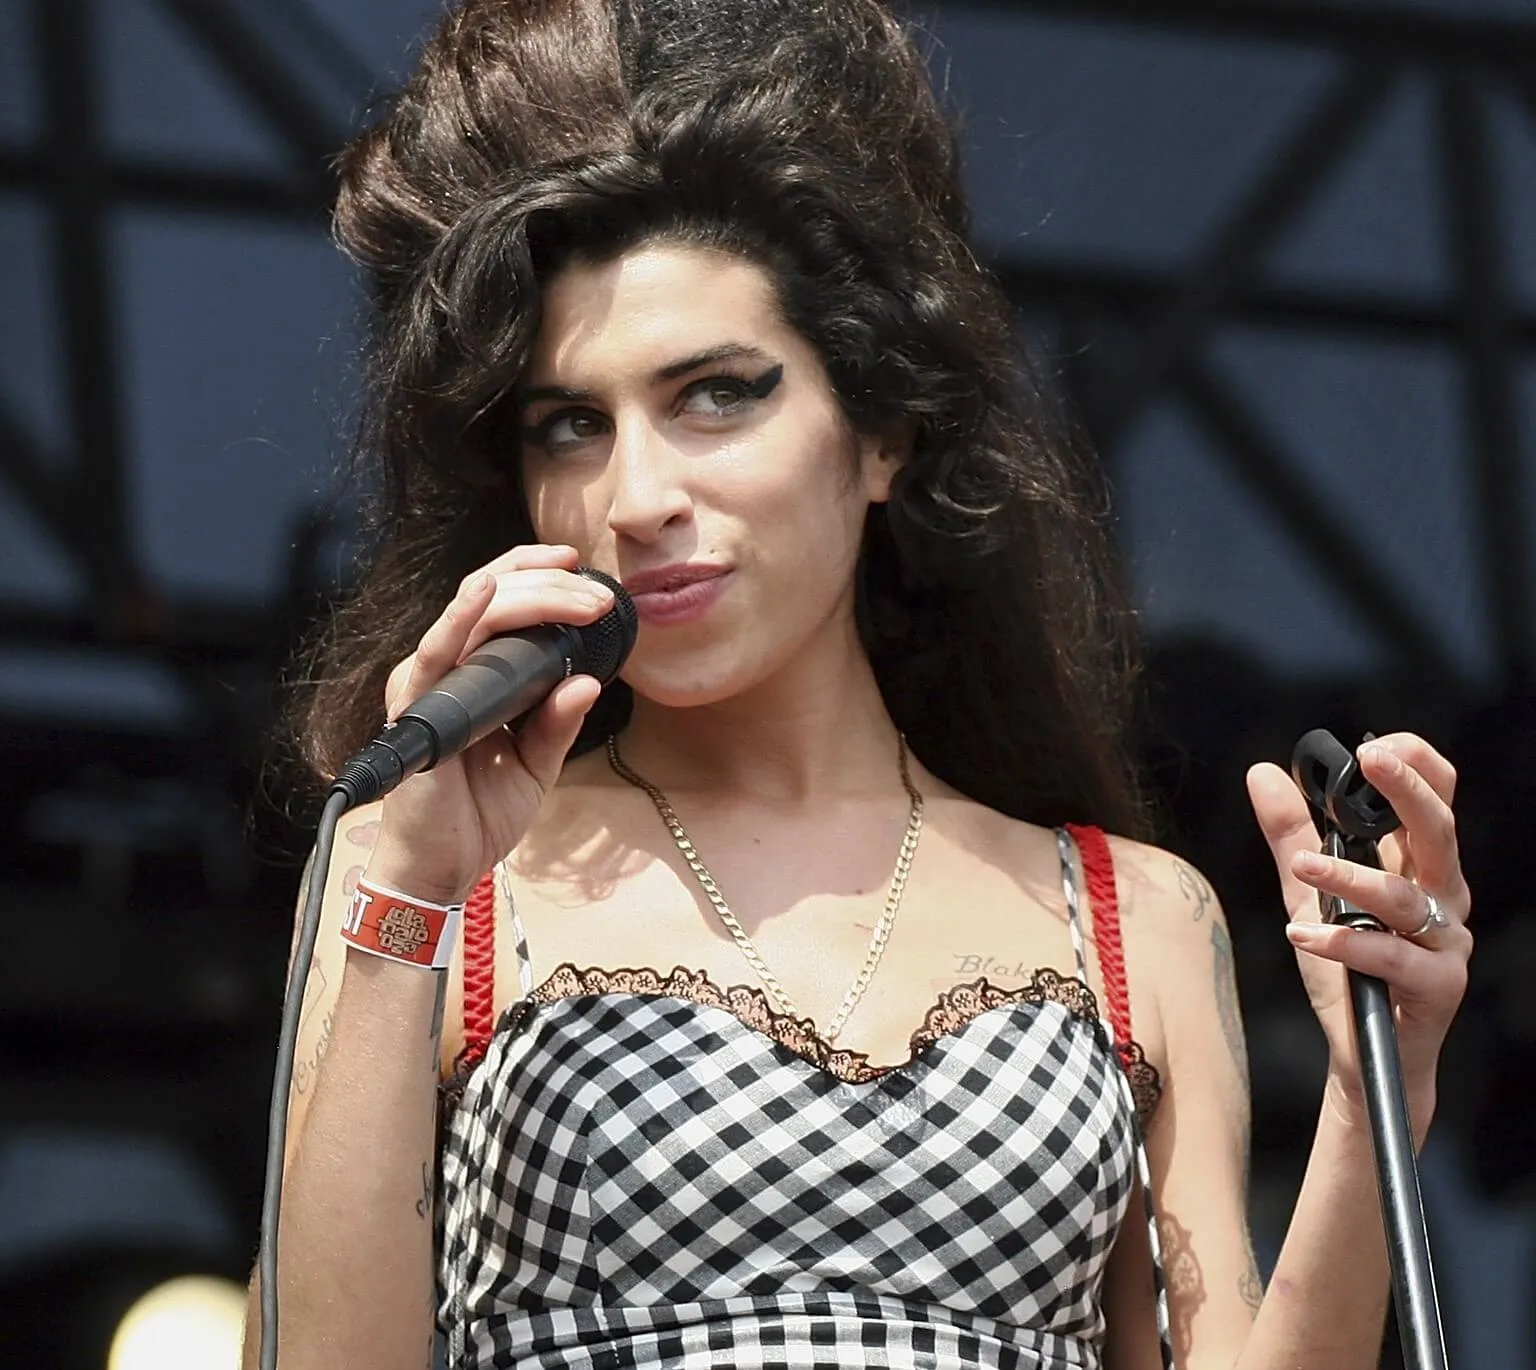 "Rehab" singer Amy Winehouse with a microphone